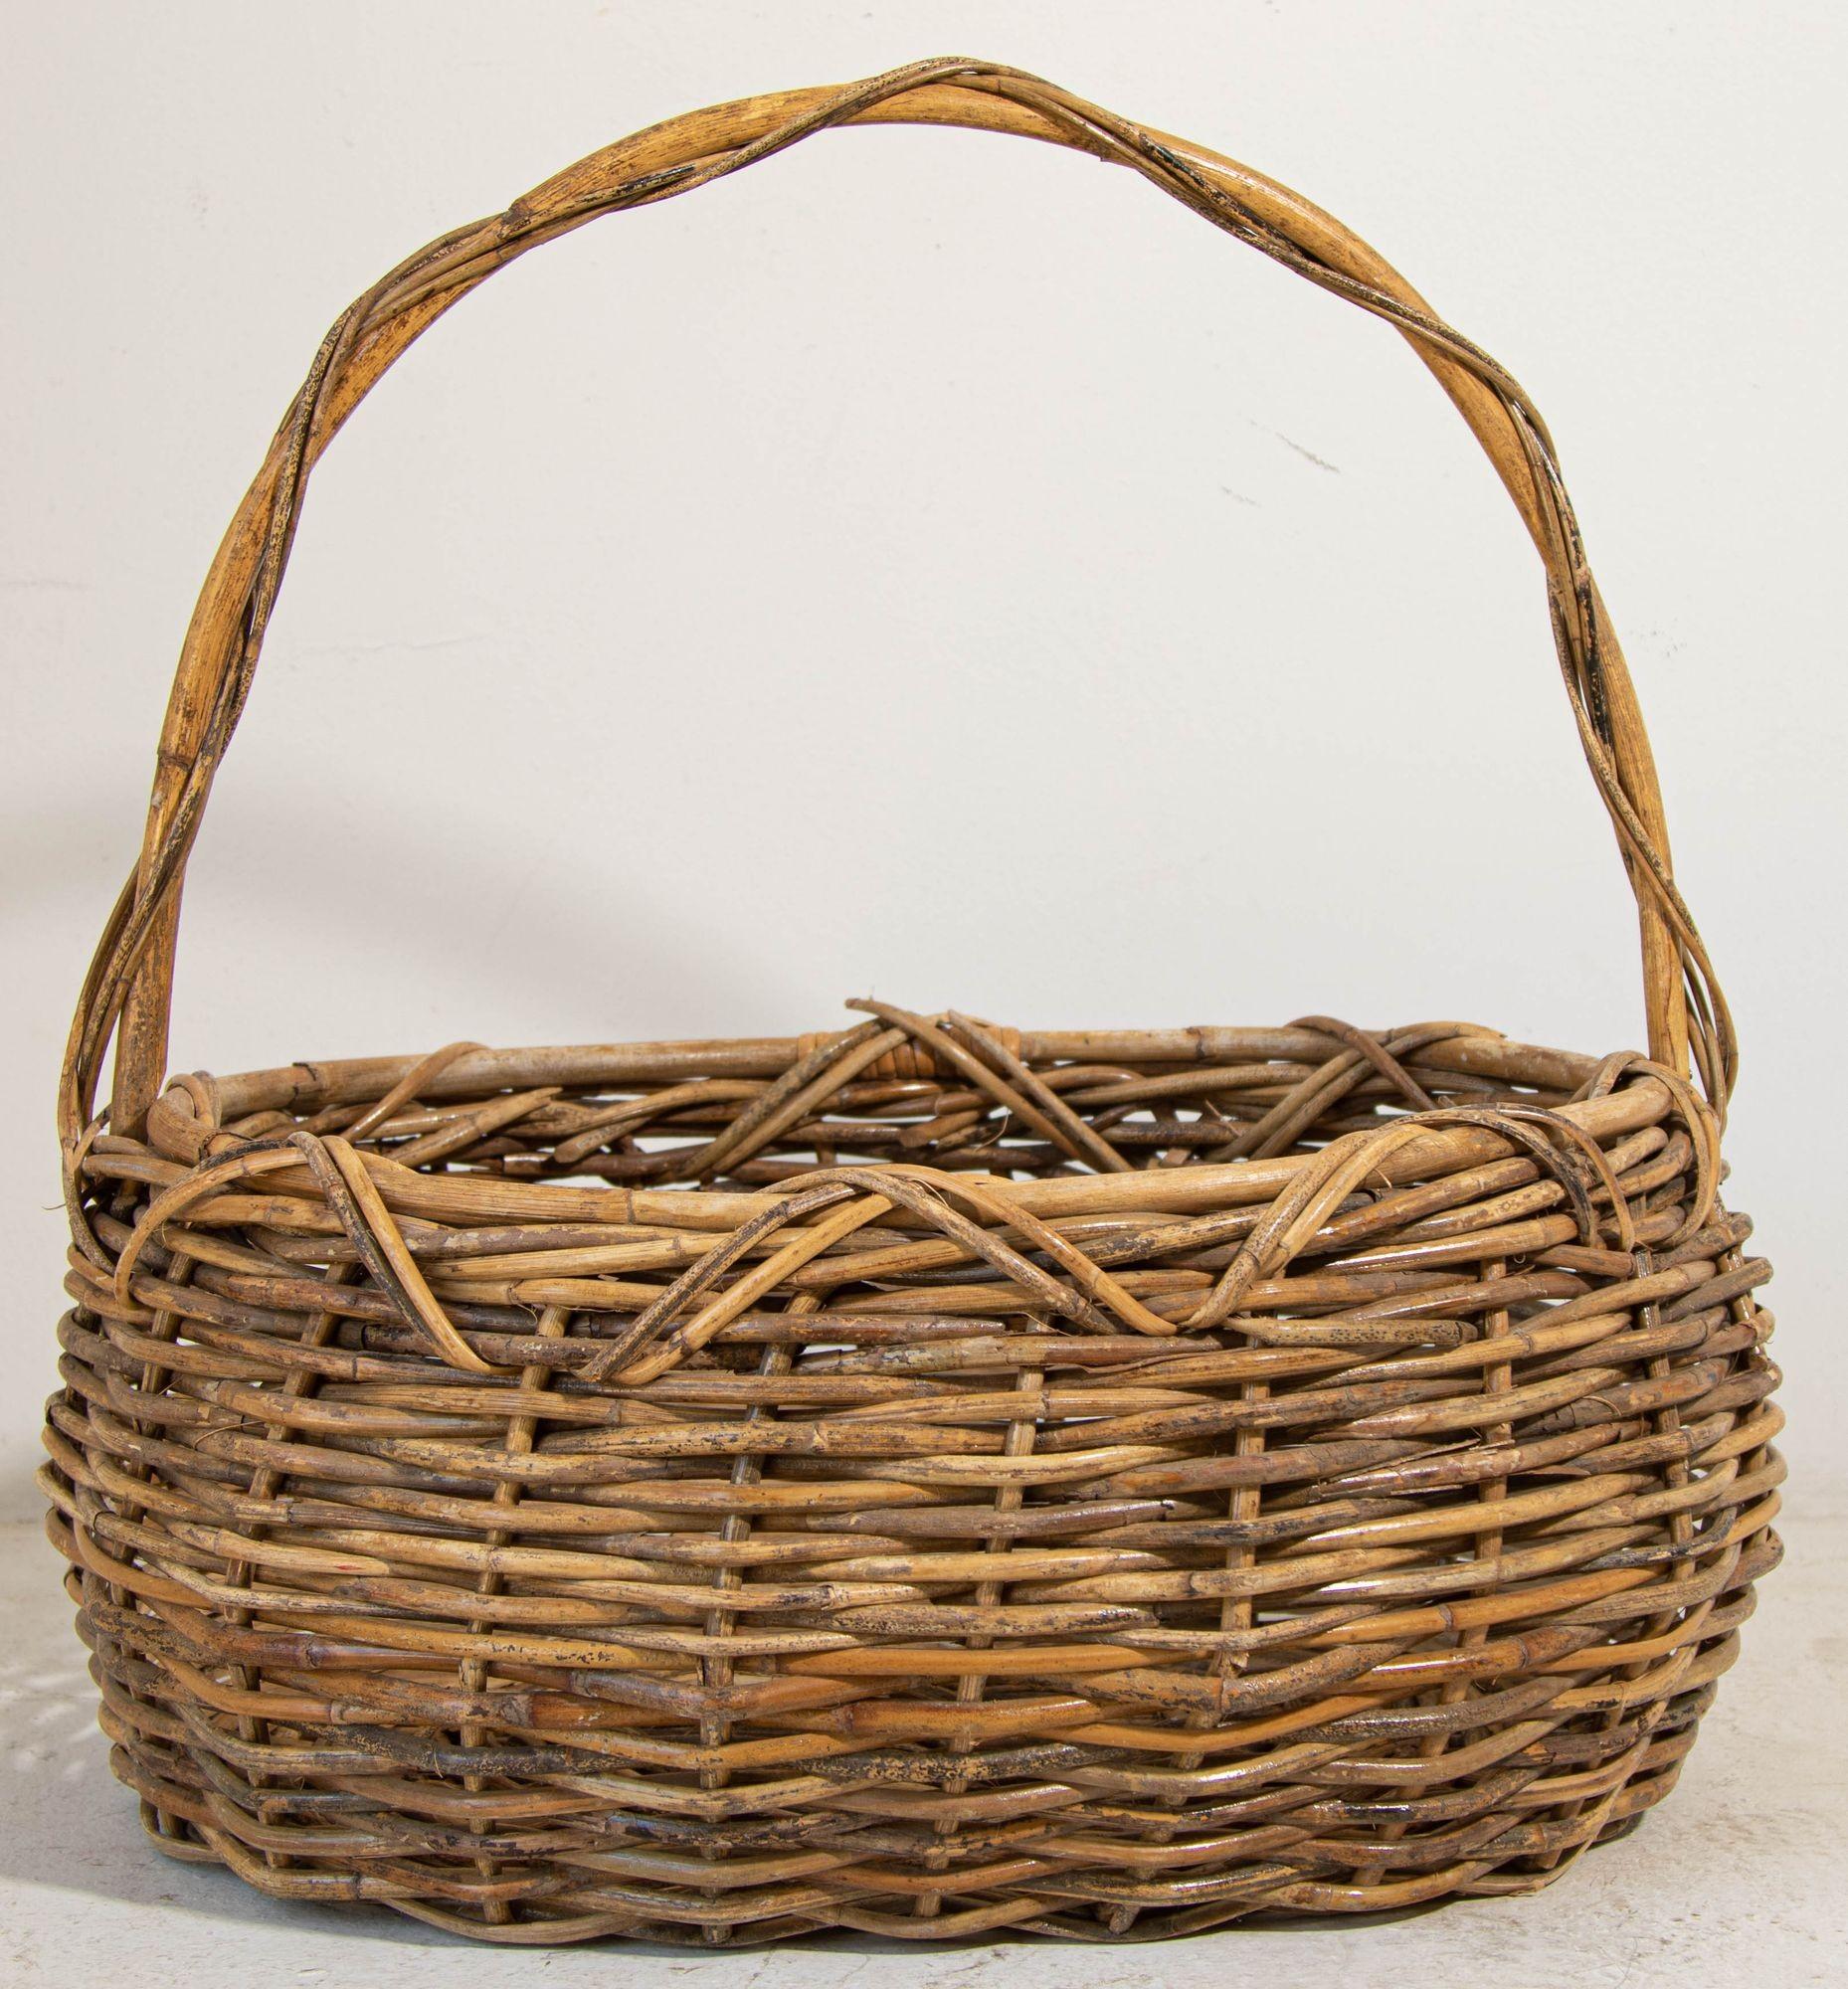 Large Antique South of France Provincial Grape Harvest Basket Handwoven Wicker with single handle.
Old weathered surface, great structural condition, circa 1940.
This large woven basket features a large single handle, thicker wicker, and sturdy